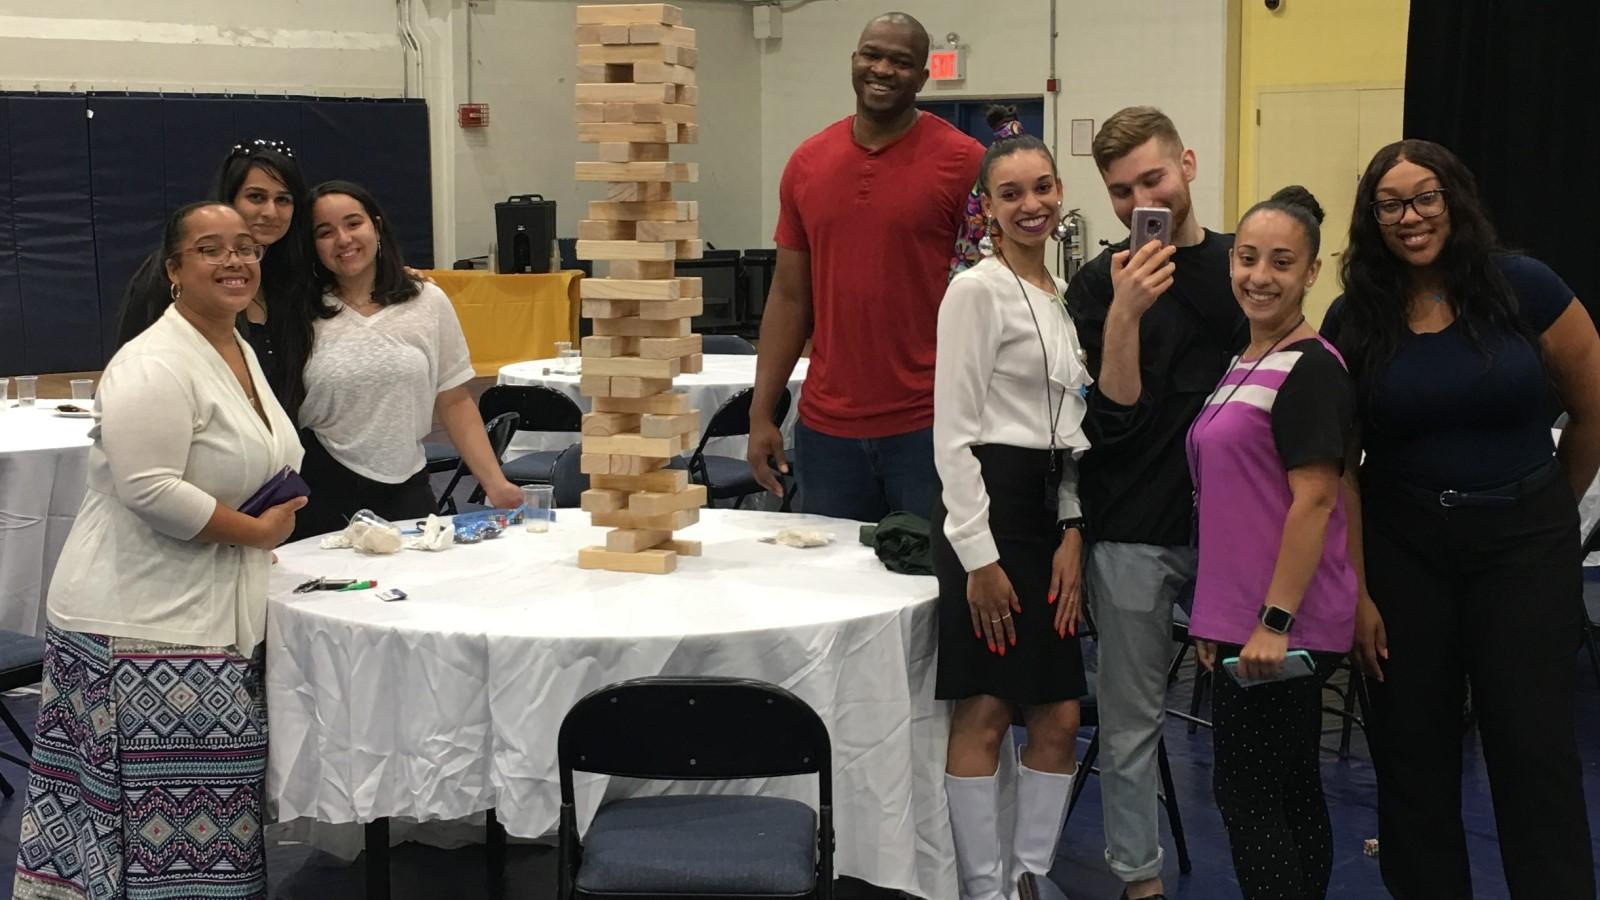 University staff members enjoying a game of giant Jenga at the Administrative Staff Council annual picnic in 2018.